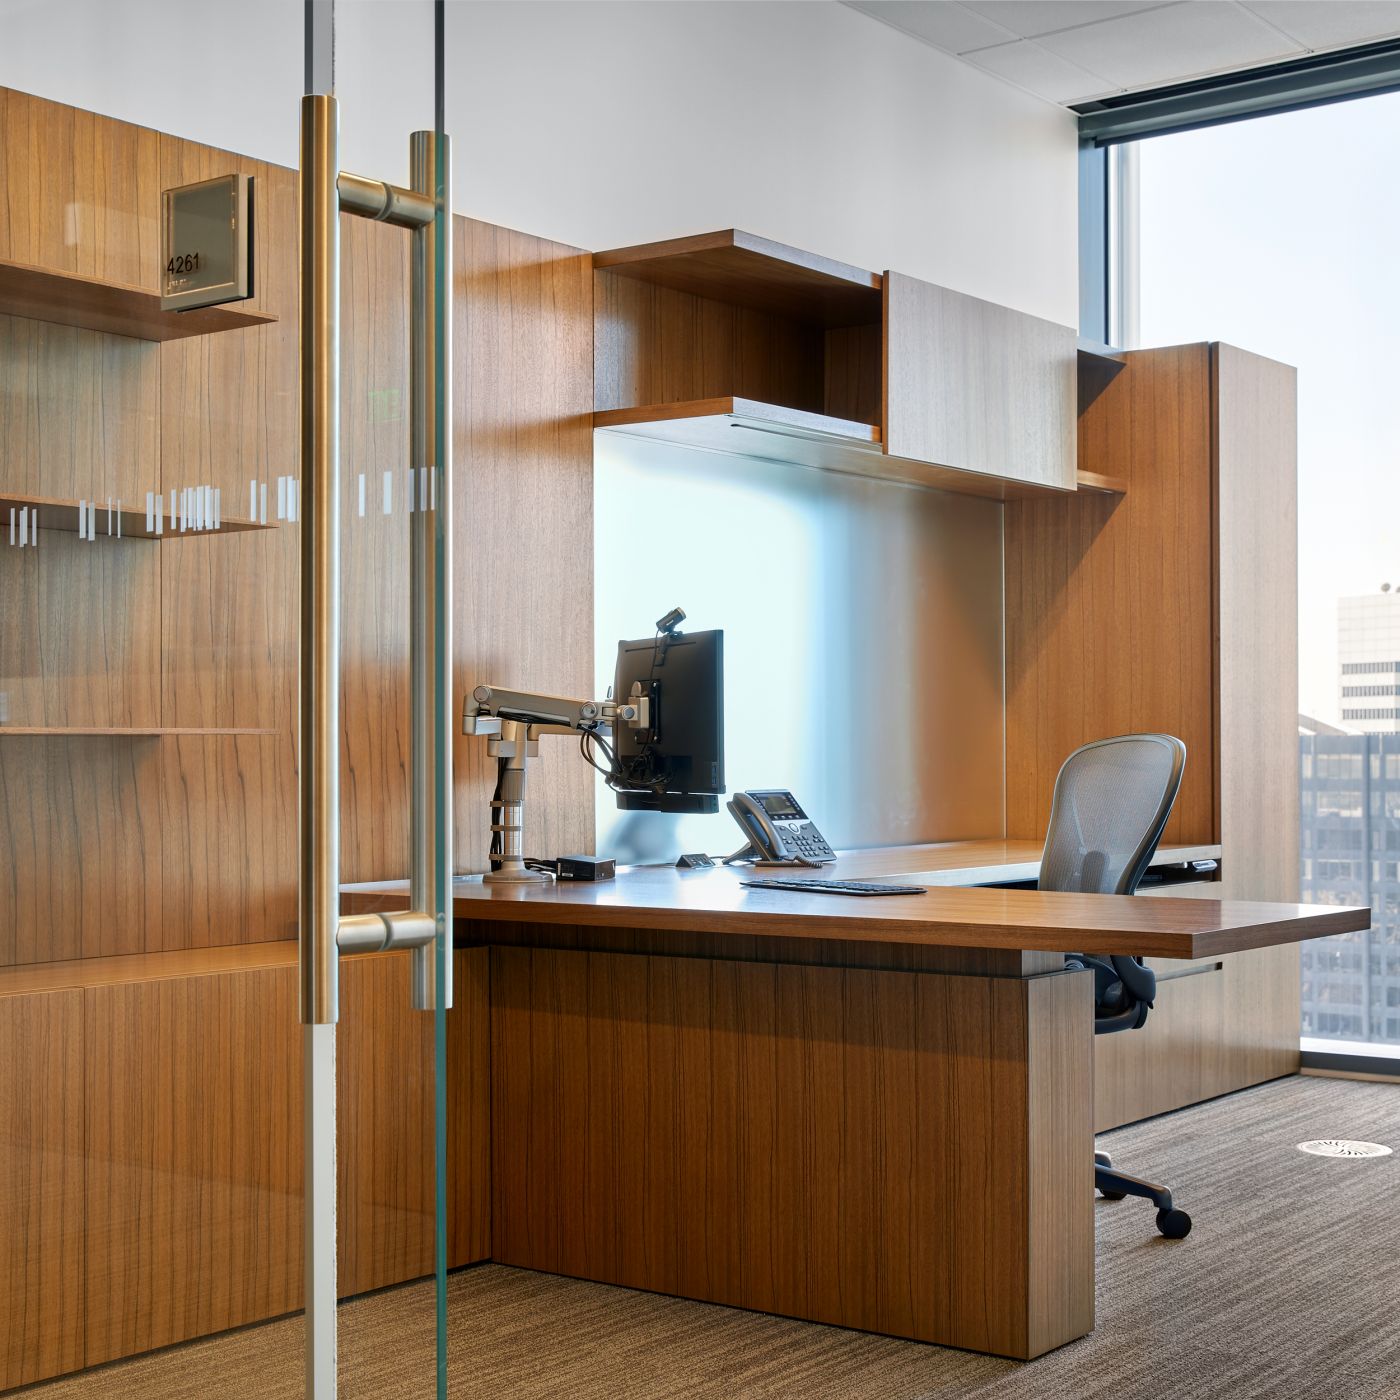 Universal-sized offices feature NEW MILLENNIA with Paldao veneers, etched mirror glass, and adjustable-height worksurfaces.